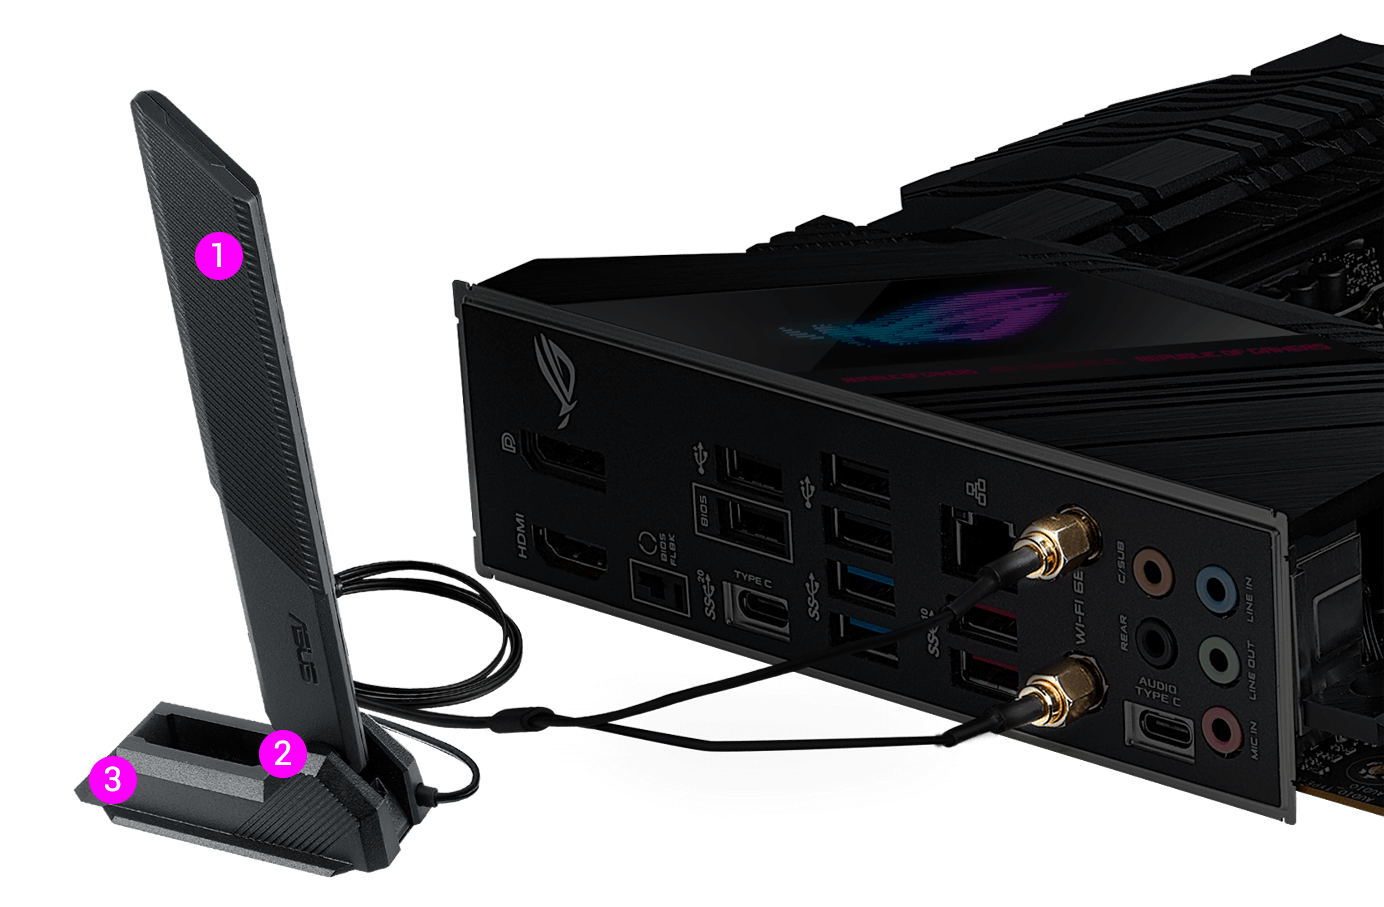 ROG Strix B560-E Gaming WiFi rear I/O panel with connected WiFi 6 antenna